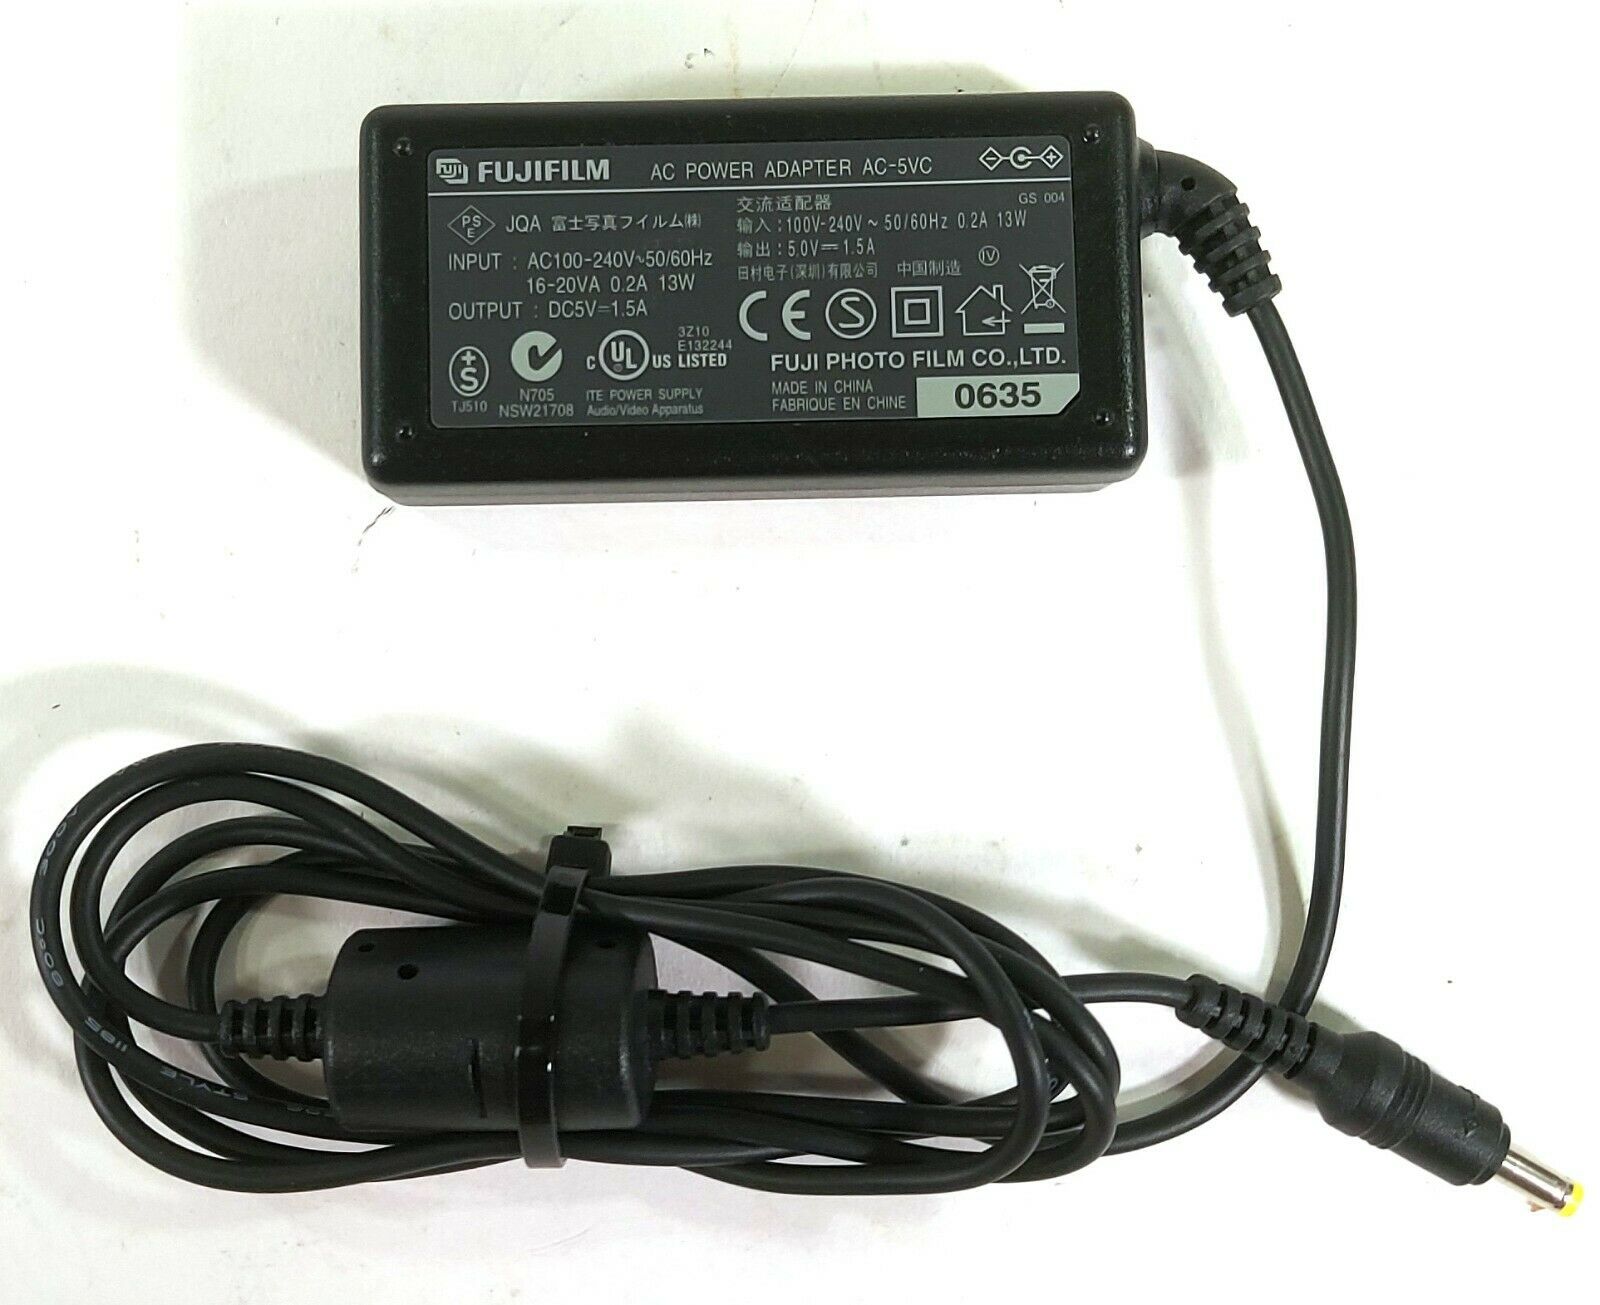 Fujifilm AC-5VC ac/DC Adapter 5V 1.5A Original Charger Power Supply Output Current: 1.5 A Unit Typ